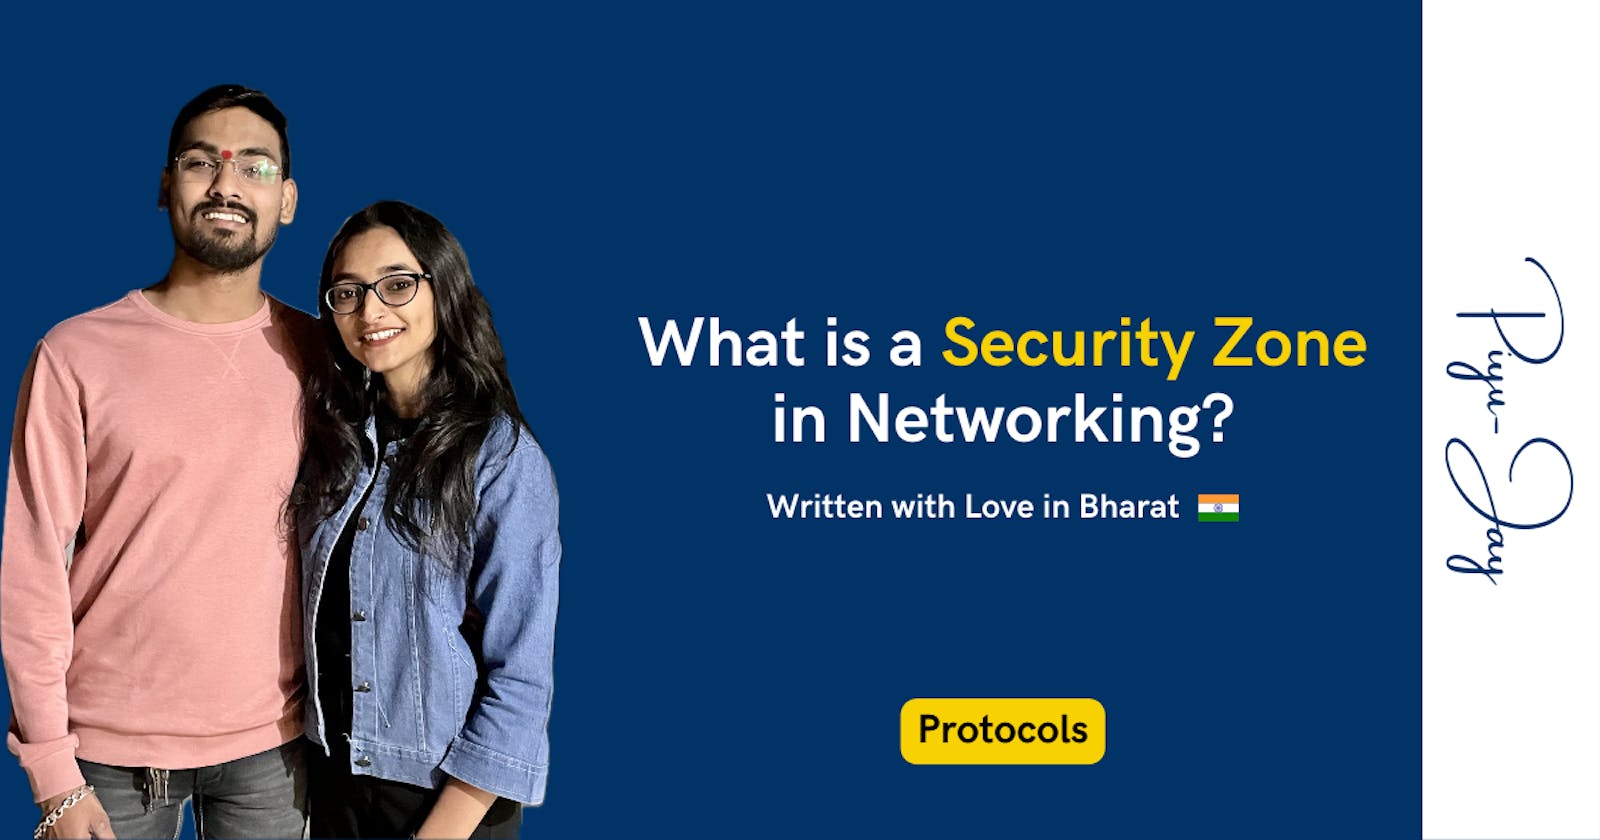 What is Security Zones in Networking?